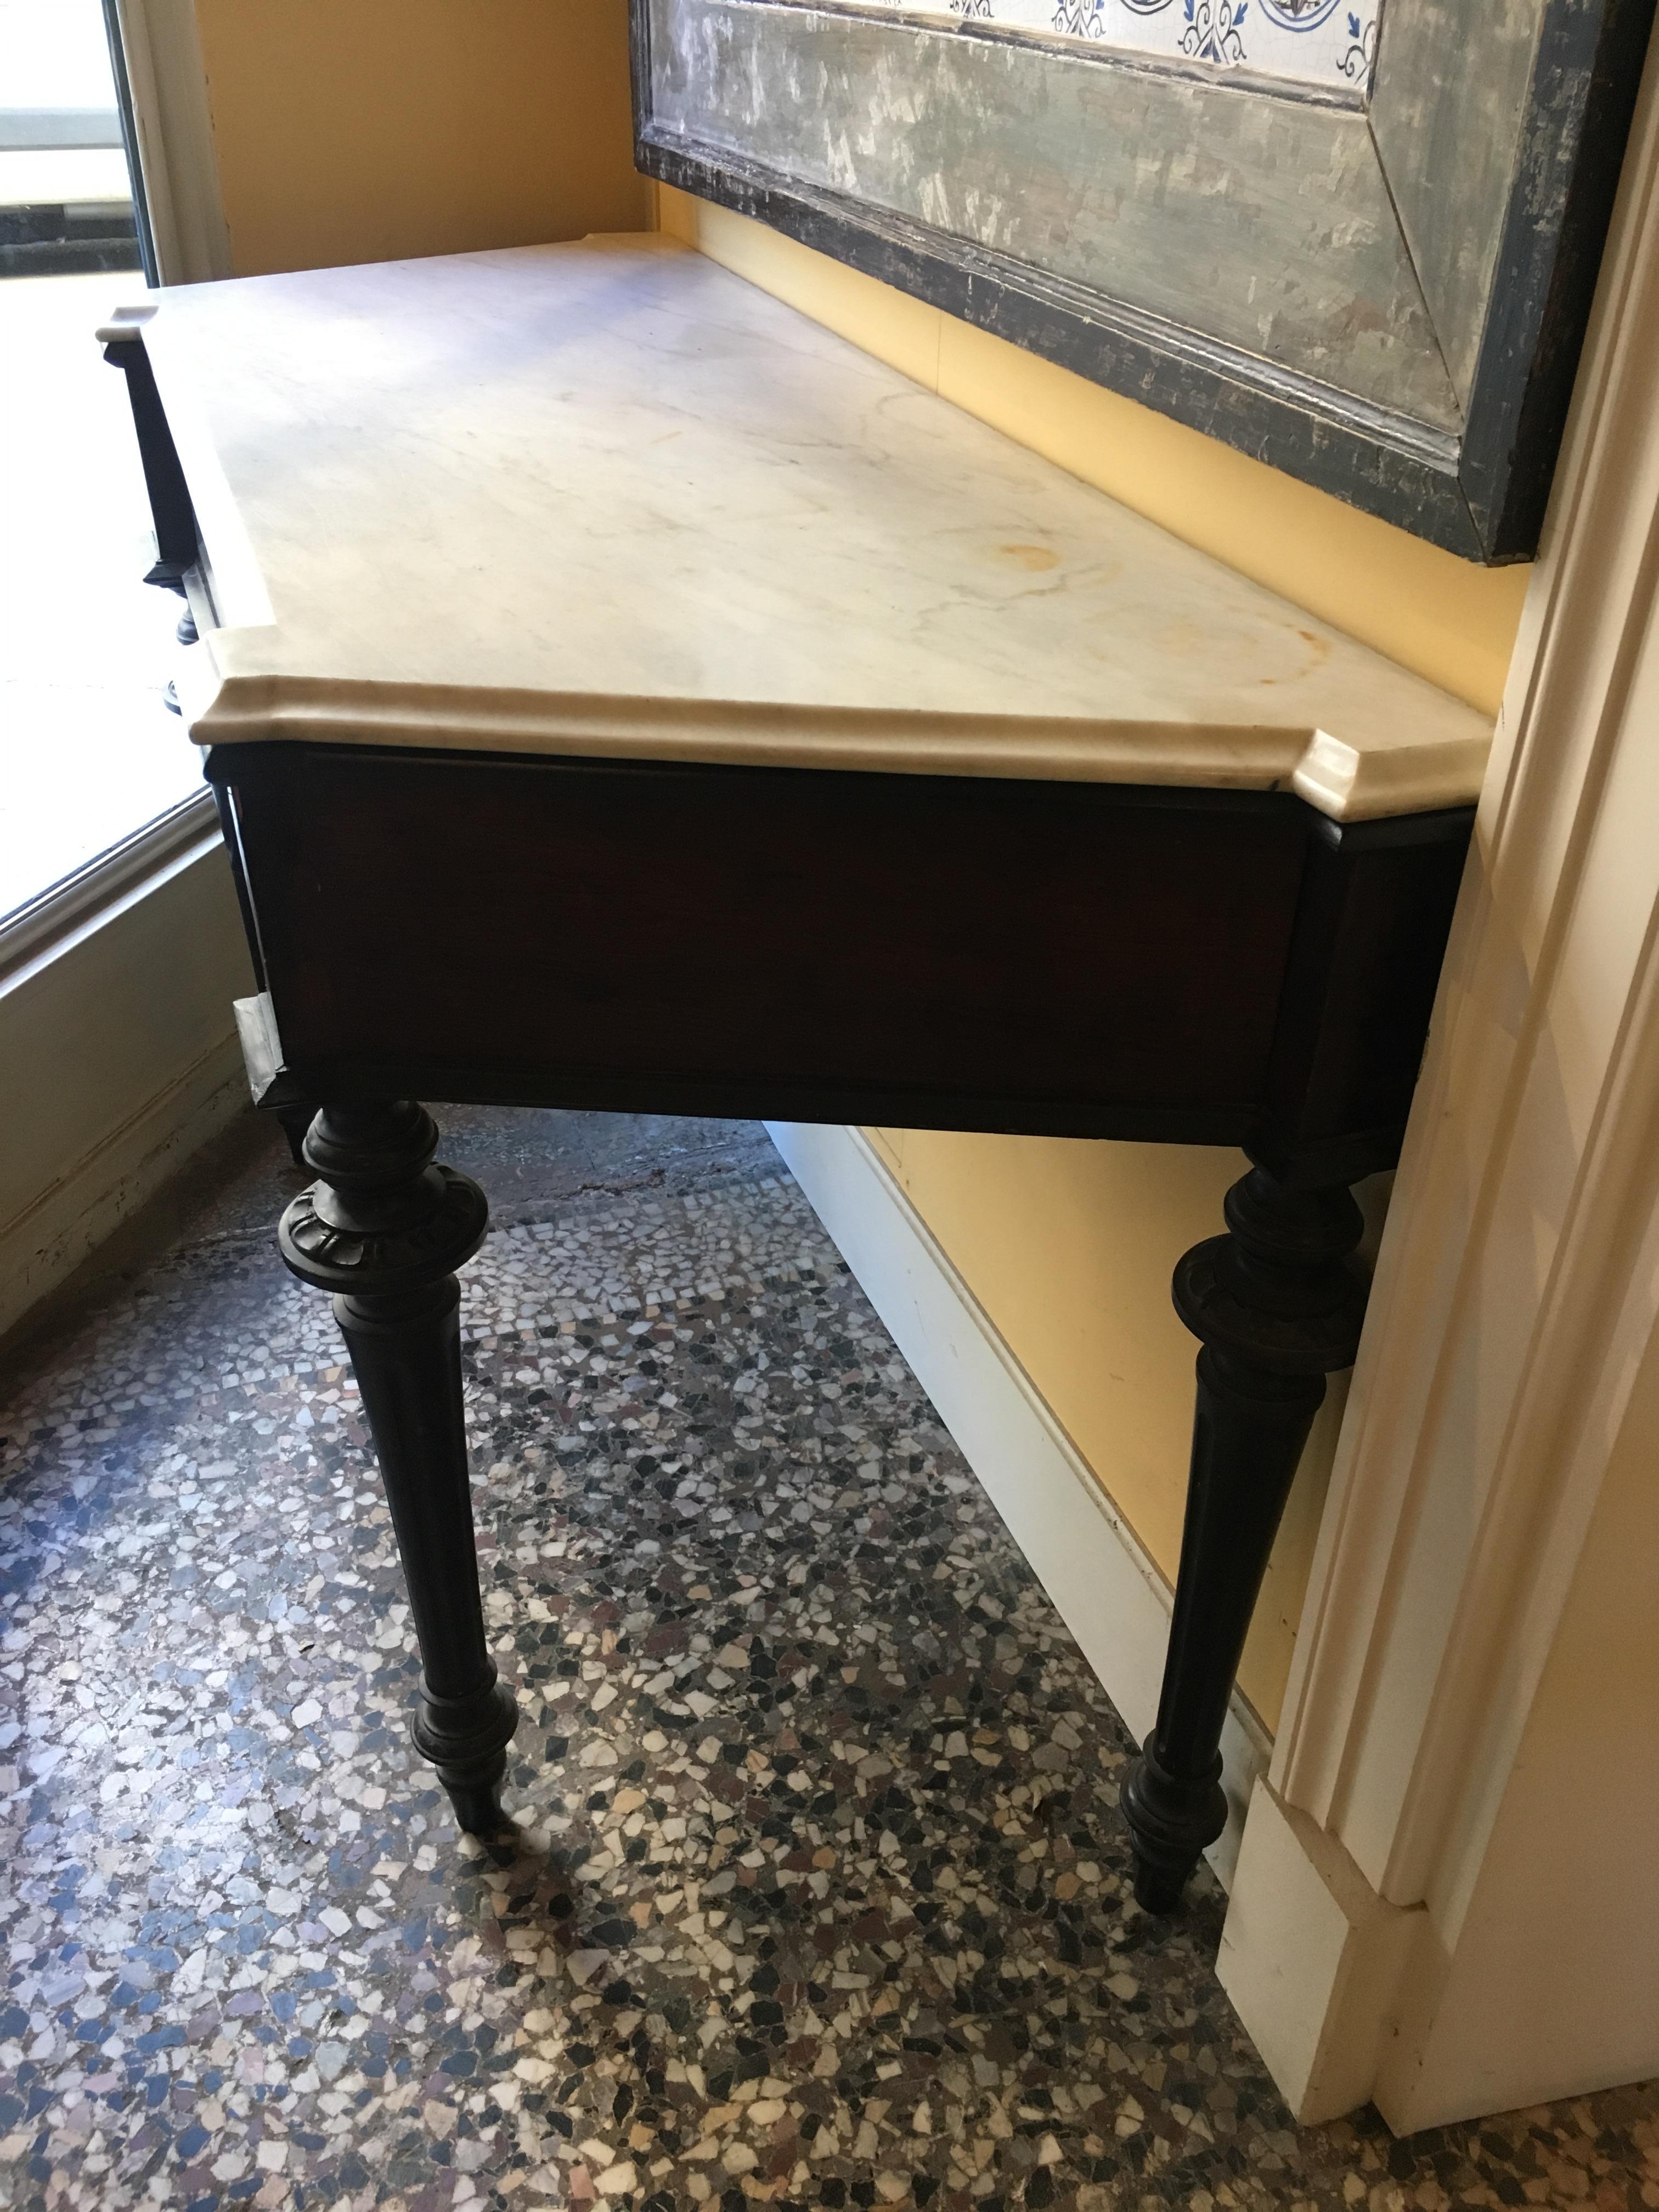 19th Century French Console with Carrara Marble Top and Black Lacquered Legs im Zustand „Gut“ im Angebot in Florence, IT